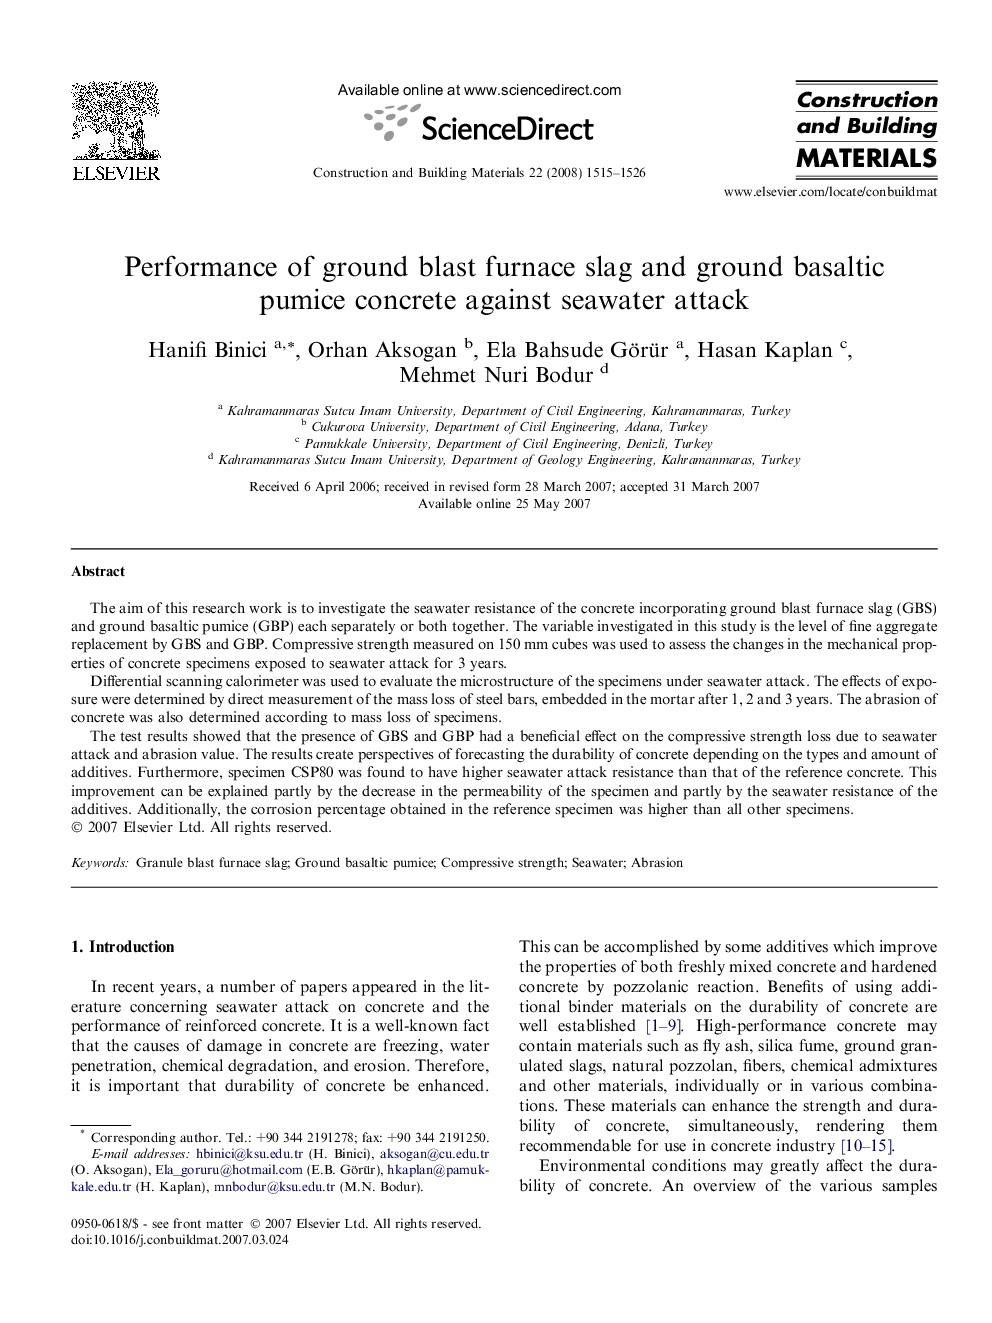 Performance of ground blast furnace slag and ground basaltic pumice concrete against seawater attack